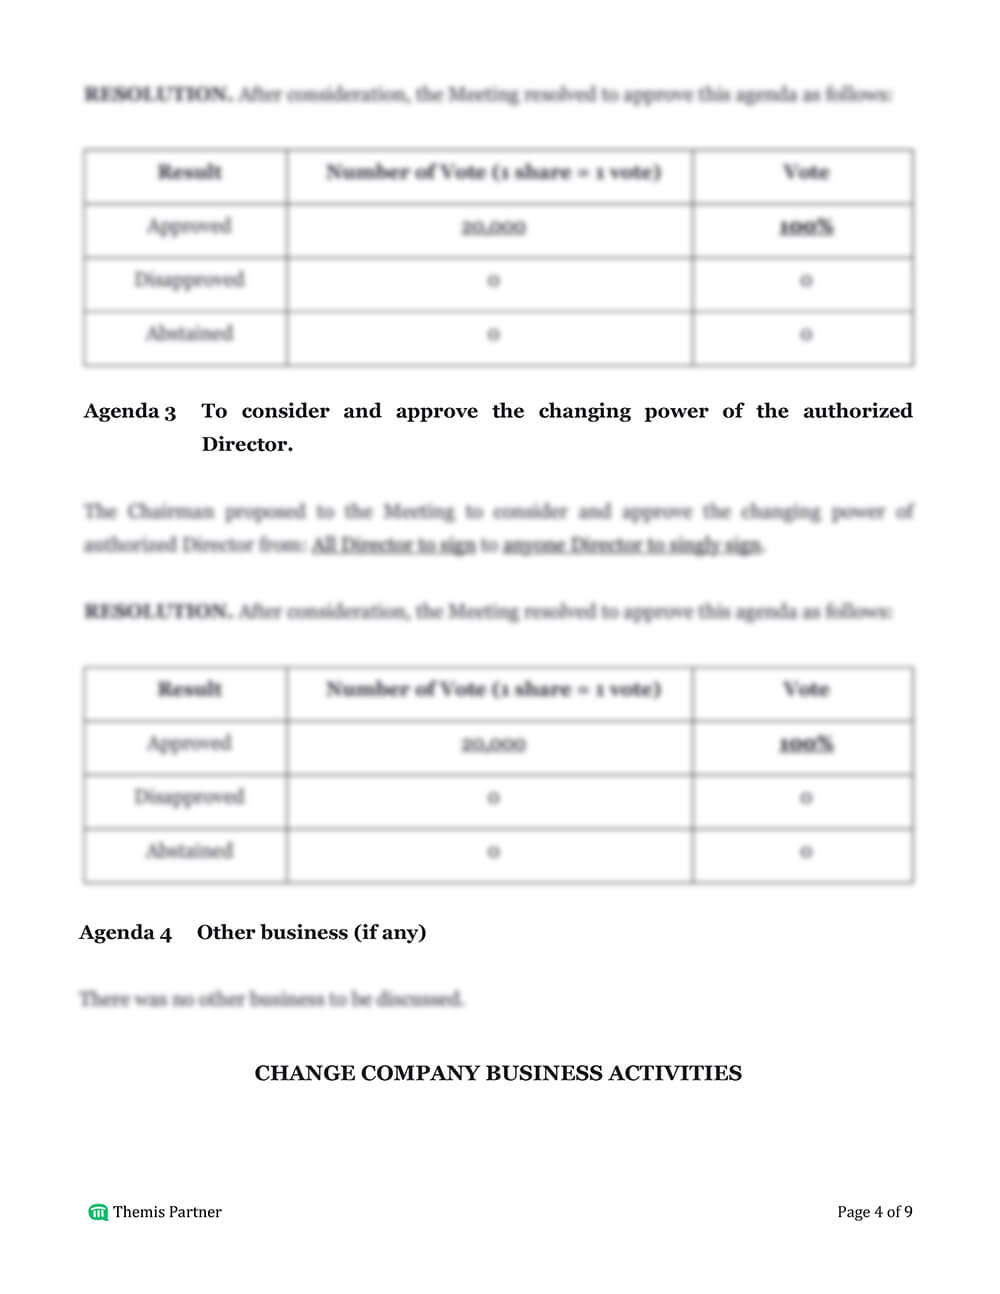 Minutes of meeting template 4